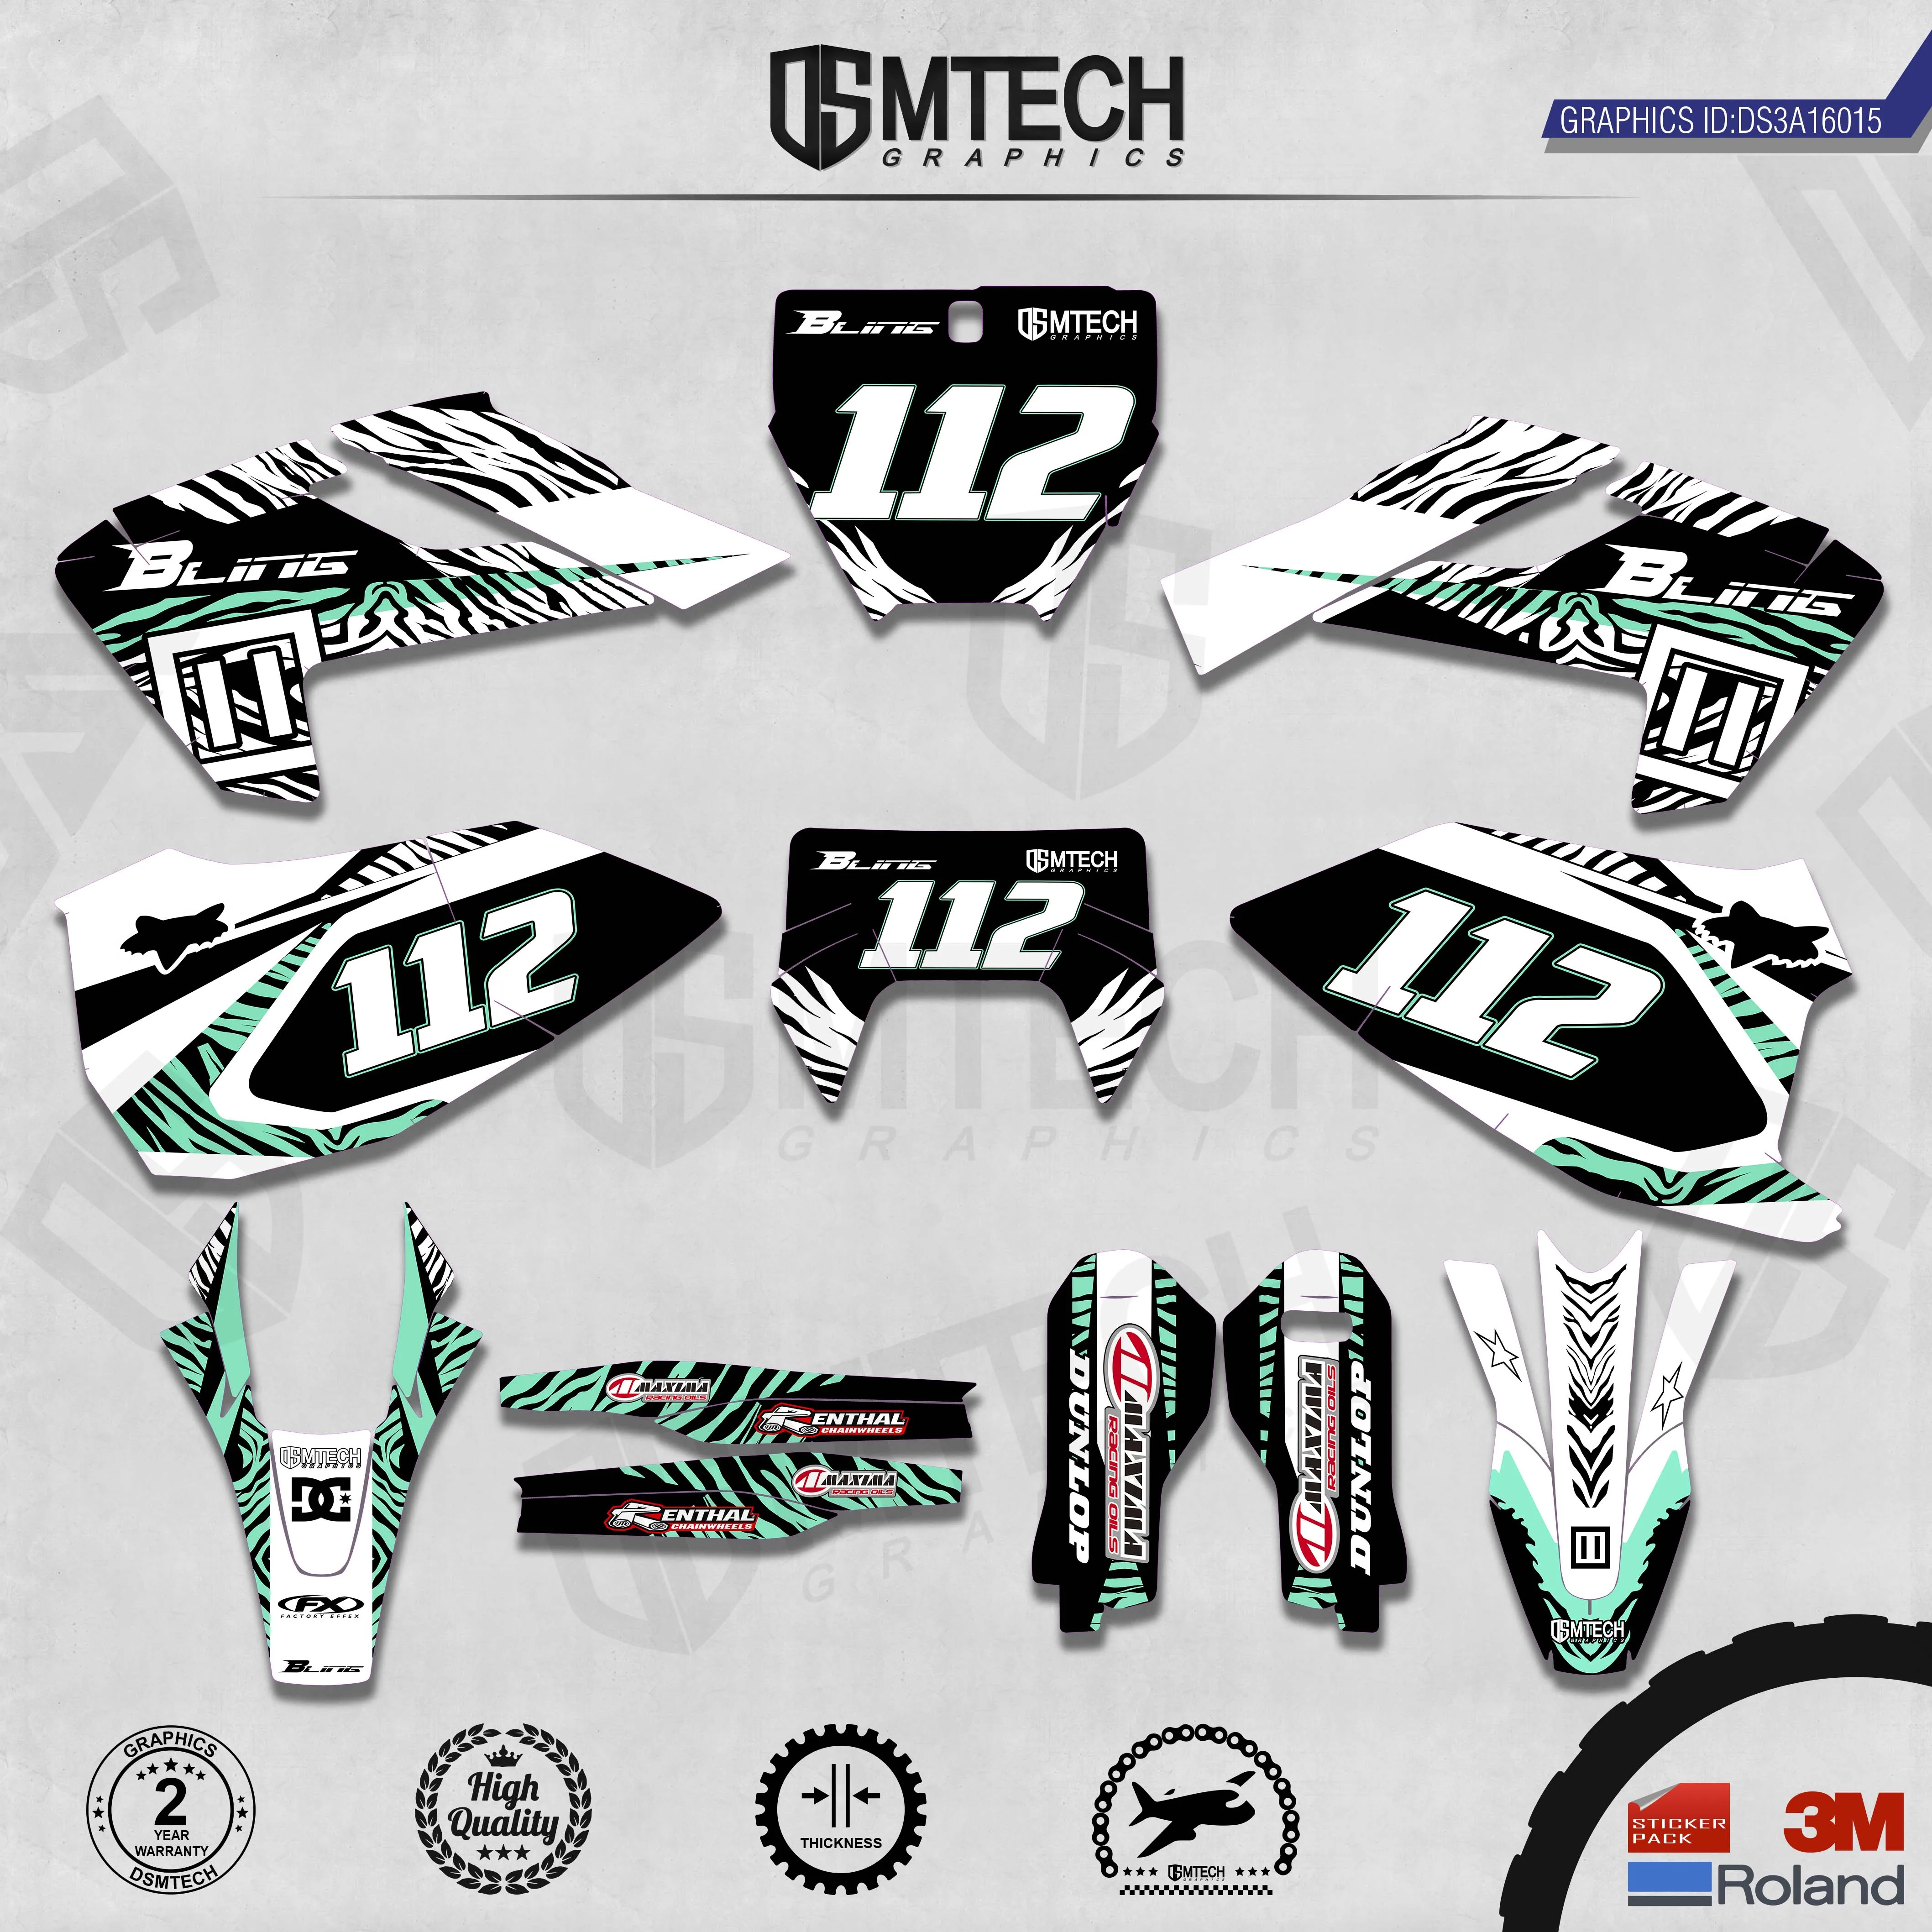 DSMTECH Customized Team Graphics Backgrounds Decals 3M Custom Stickers For TC FC TX FX FS 2016-2018  TE FE 2017-2019  015